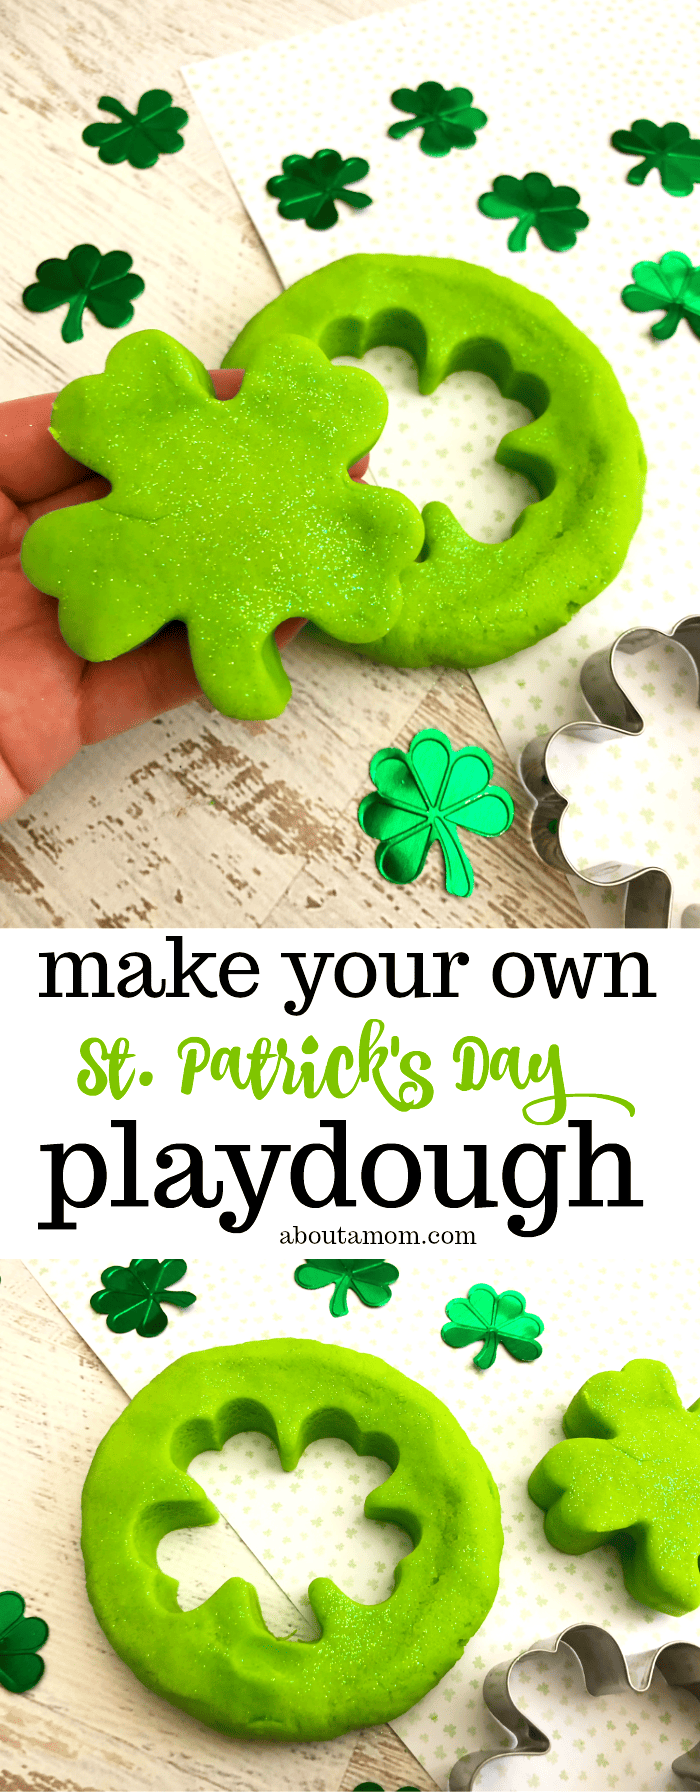 St. Patrick's Day Playdough. This glittery green homemade playdough recipe is a fun St. Patrick's Day activity for kids. 